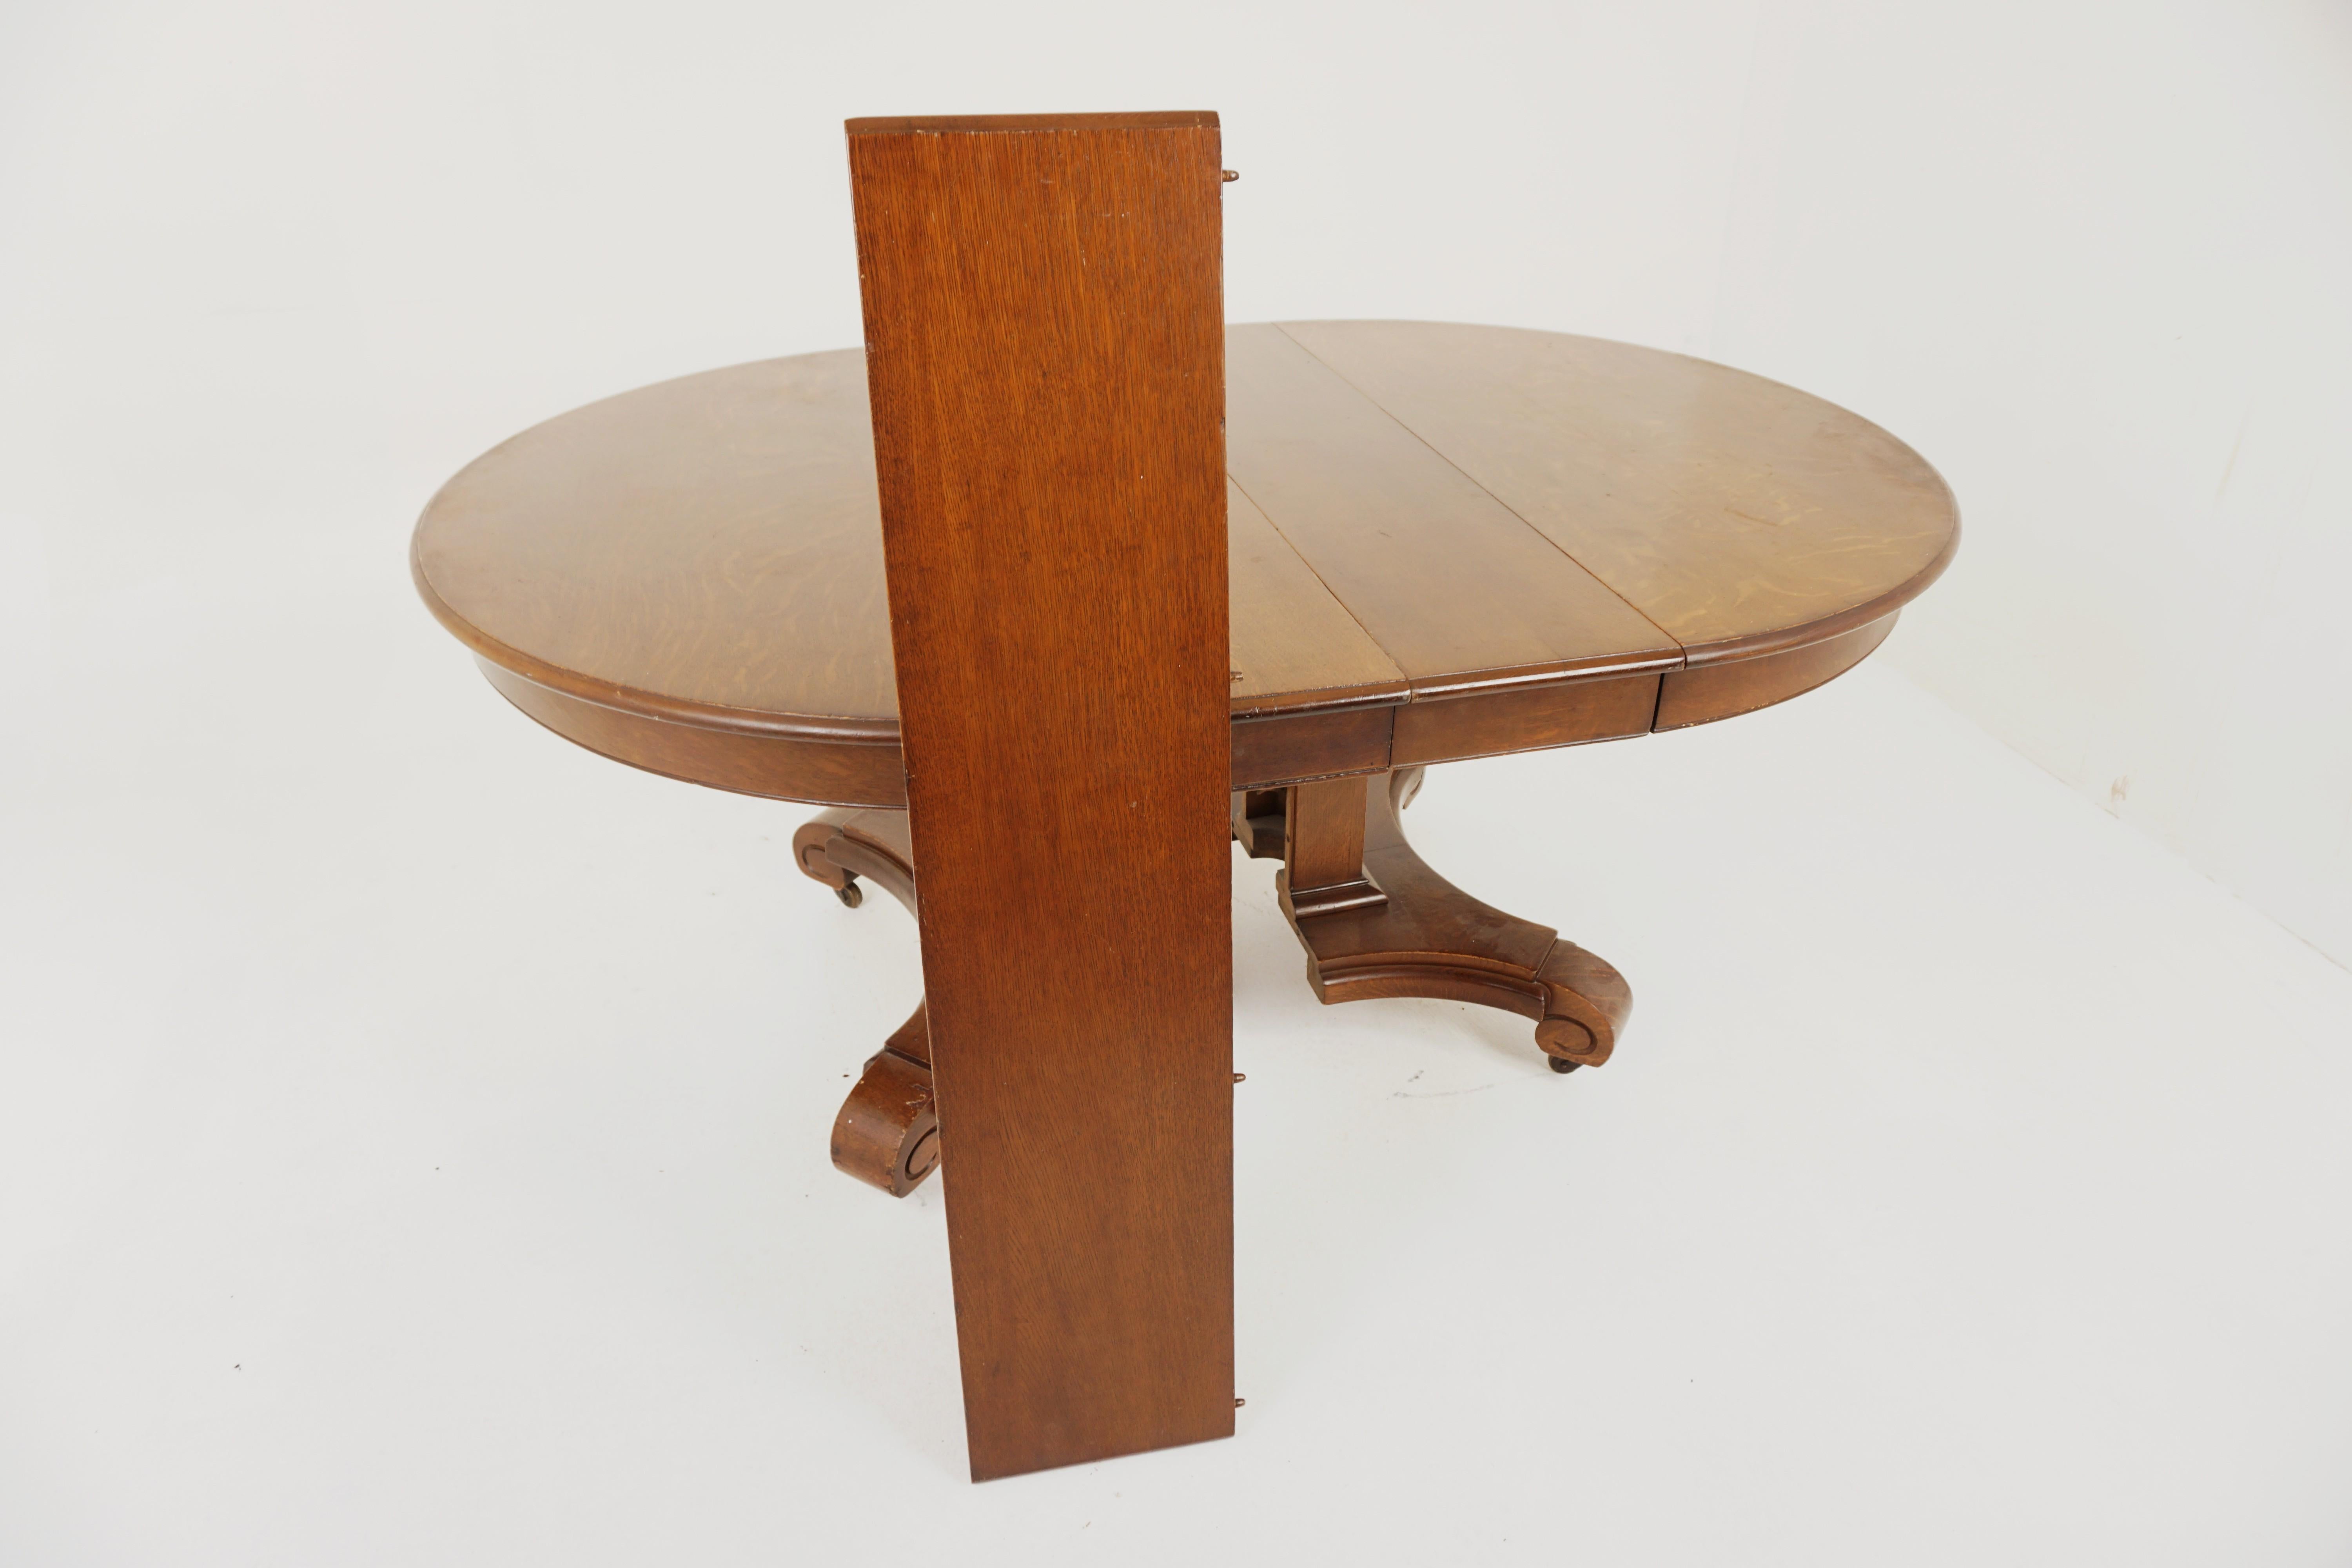 Mission Tiger Oak Arts & Crafts Round Dining Table 3 Leaves, America 1920, H1197 For Sale 1